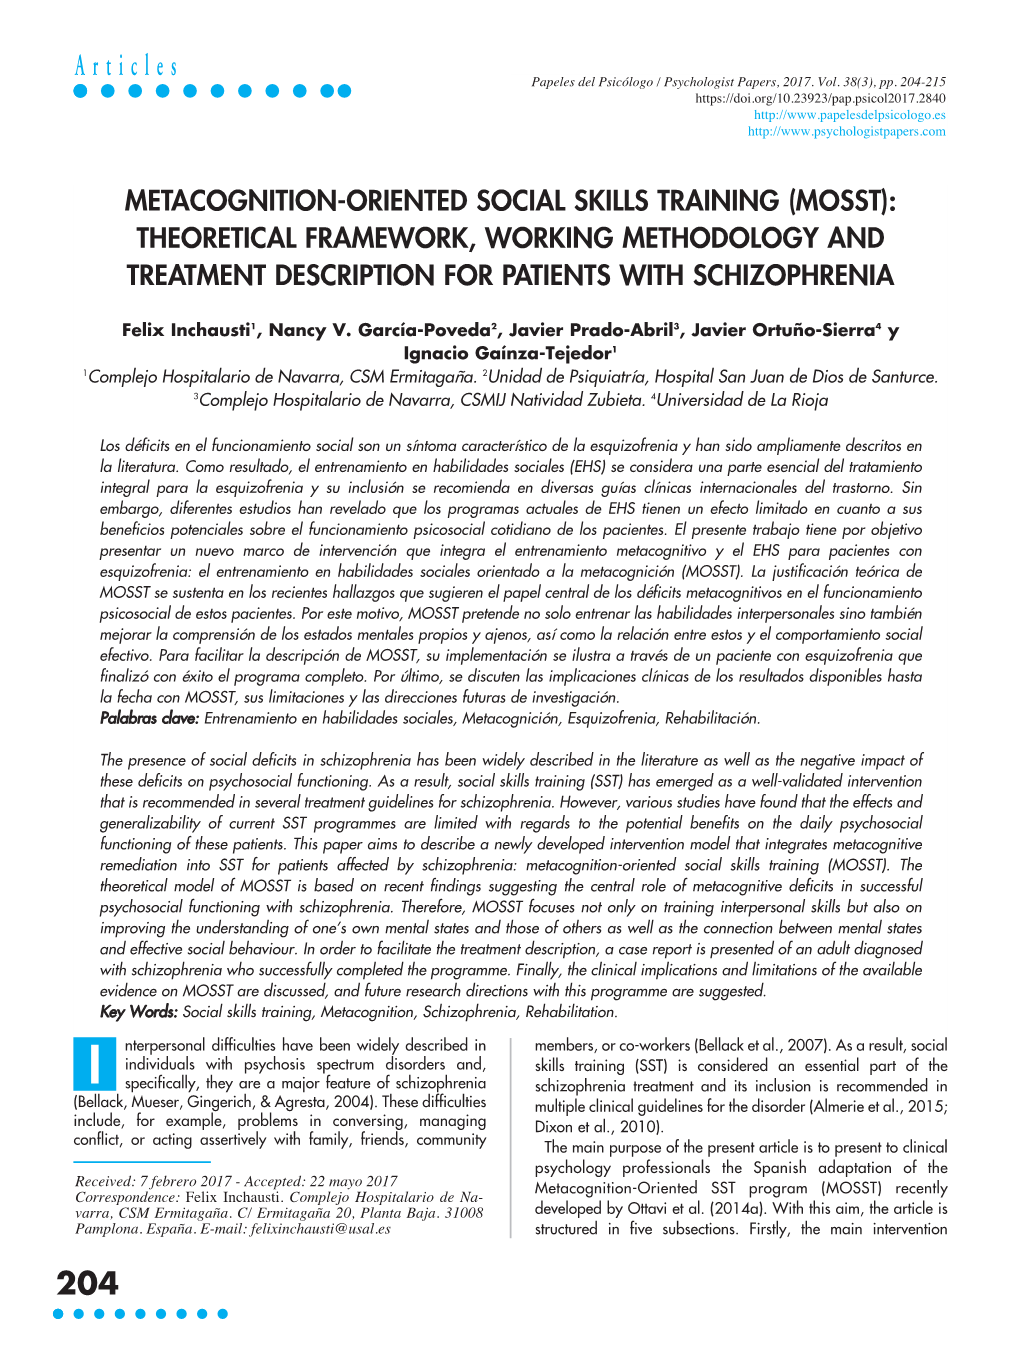 Metacognition-Oriented Social Skills Training (Mosst): Theoretical Framework, Working Methodology and Treatment Description for Patients with Schizophrenia